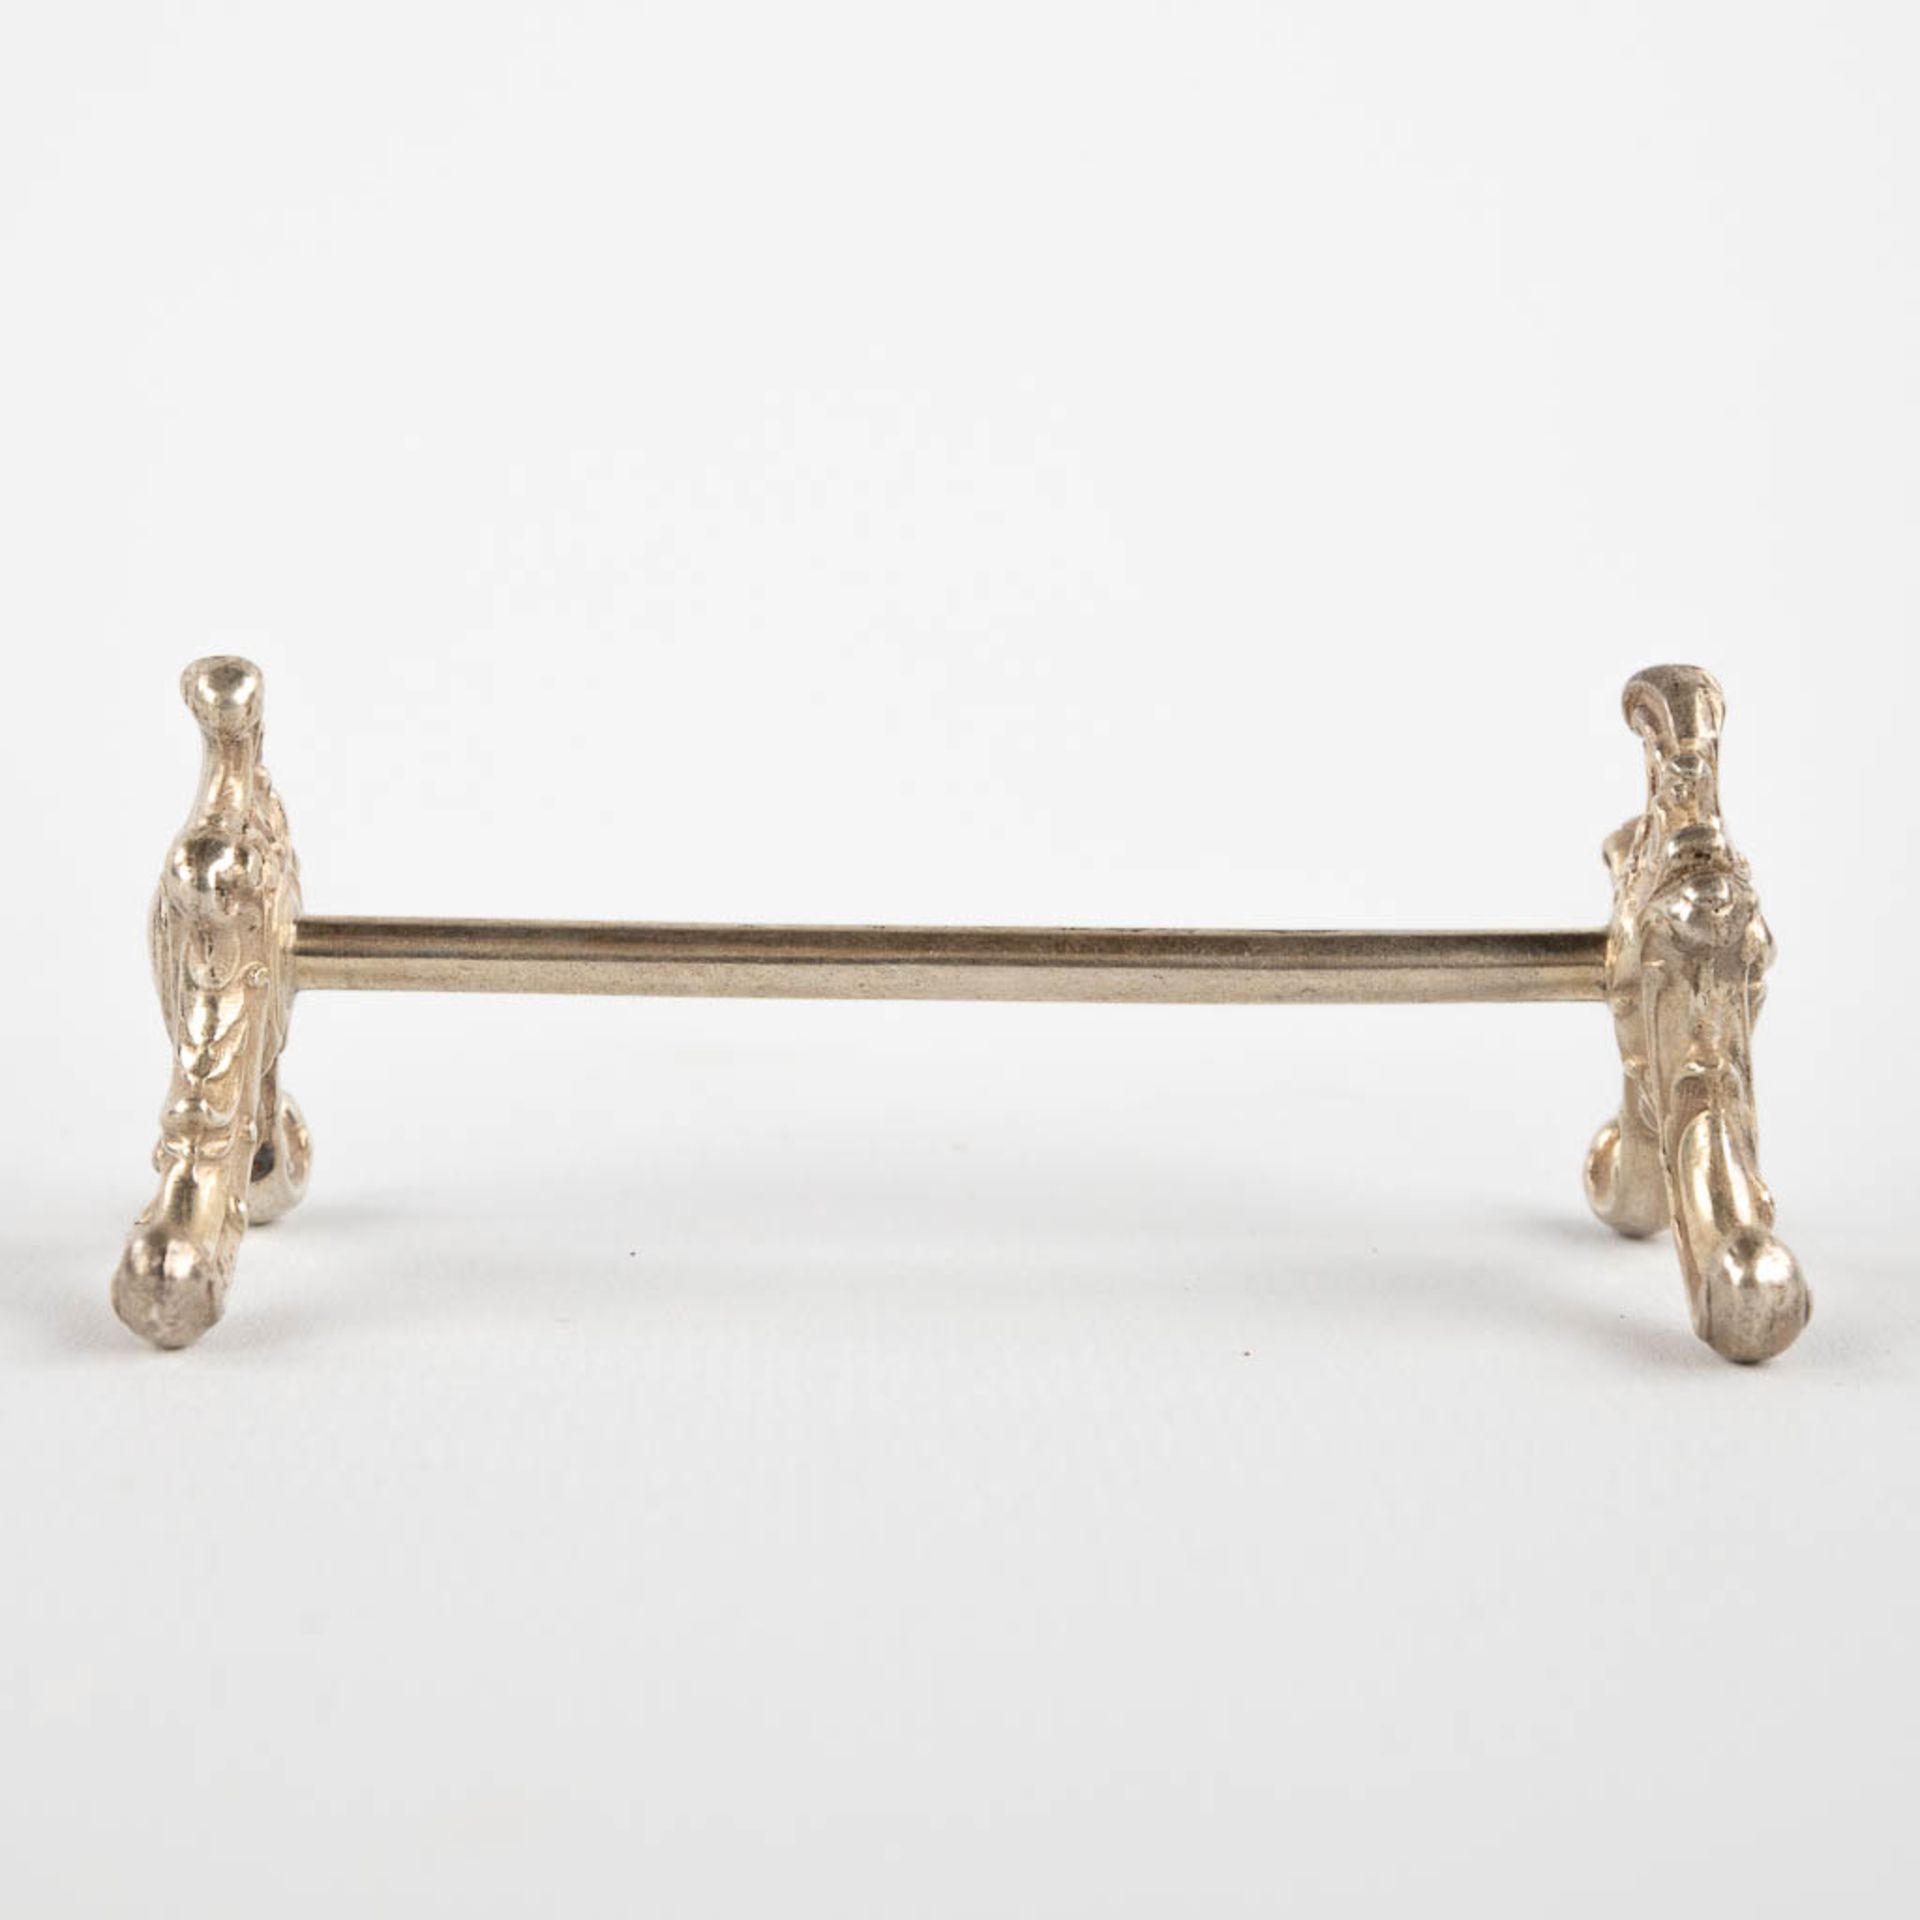 12 silver knife rests, Louis XV style, Germany. 324g. (D:9 x H:3,5 cm) - Image 8 of 9